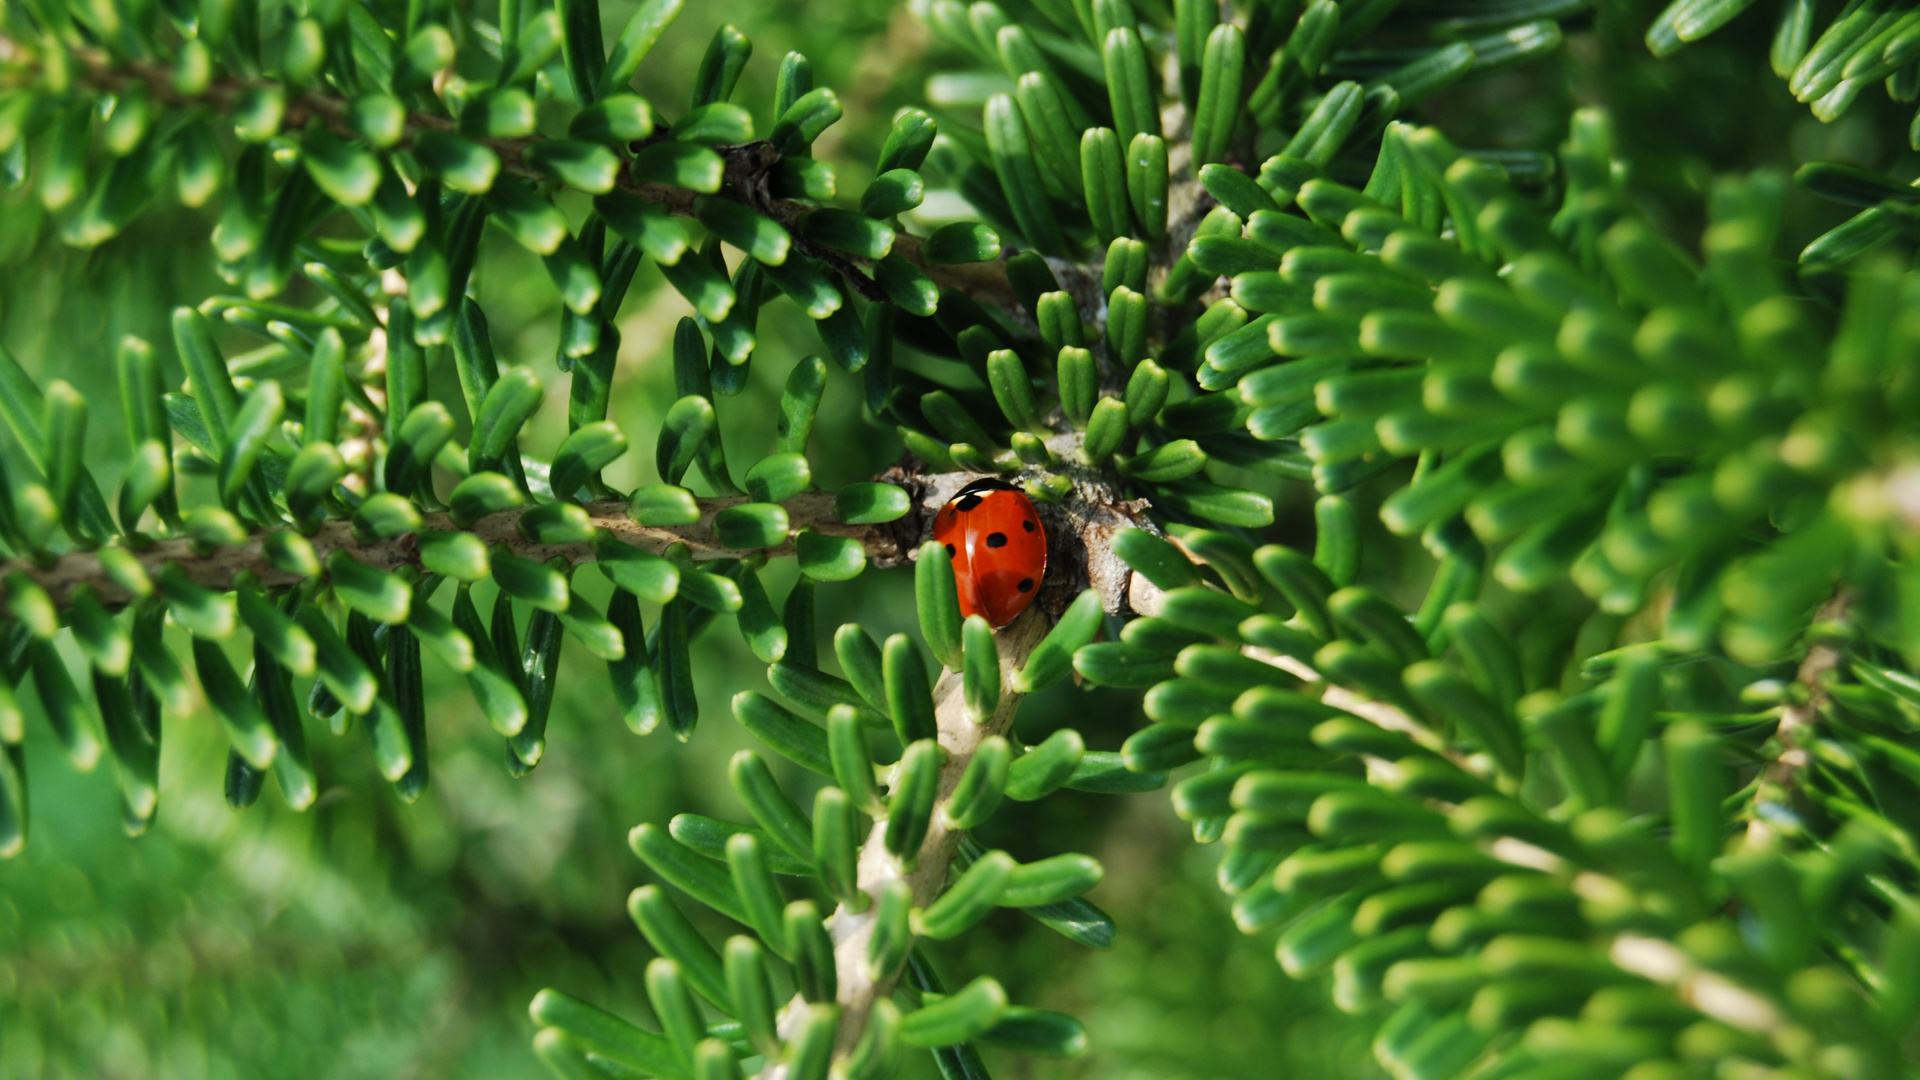 Red and Black Ladybug on Green Plant During Daytime. Wallpaper in 1920x1080 Resolution